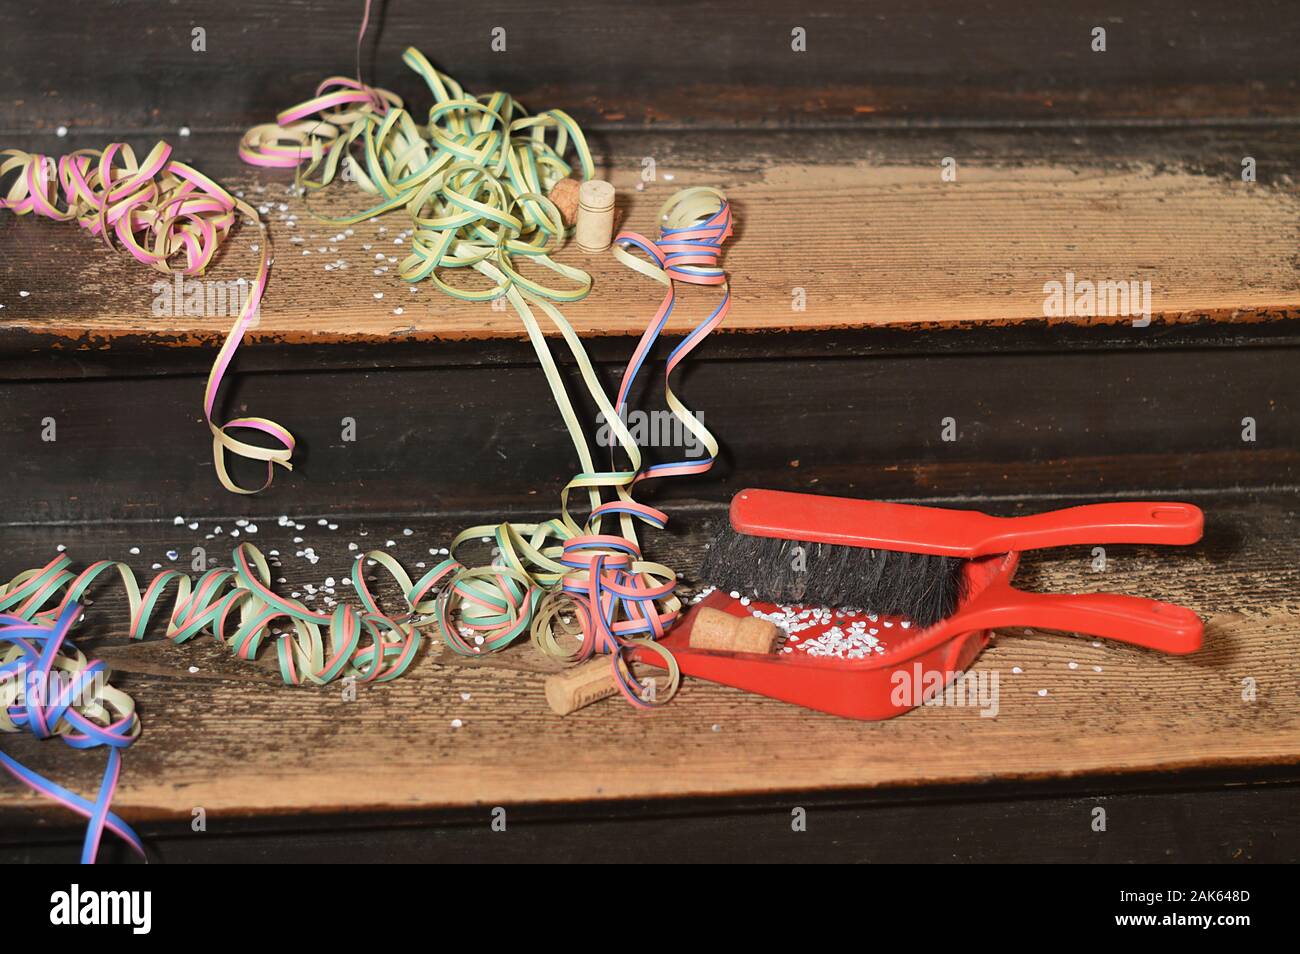 confetti and ribbons on wood steps and a broom with a dust pan - cleaning up after the party Stock Photo